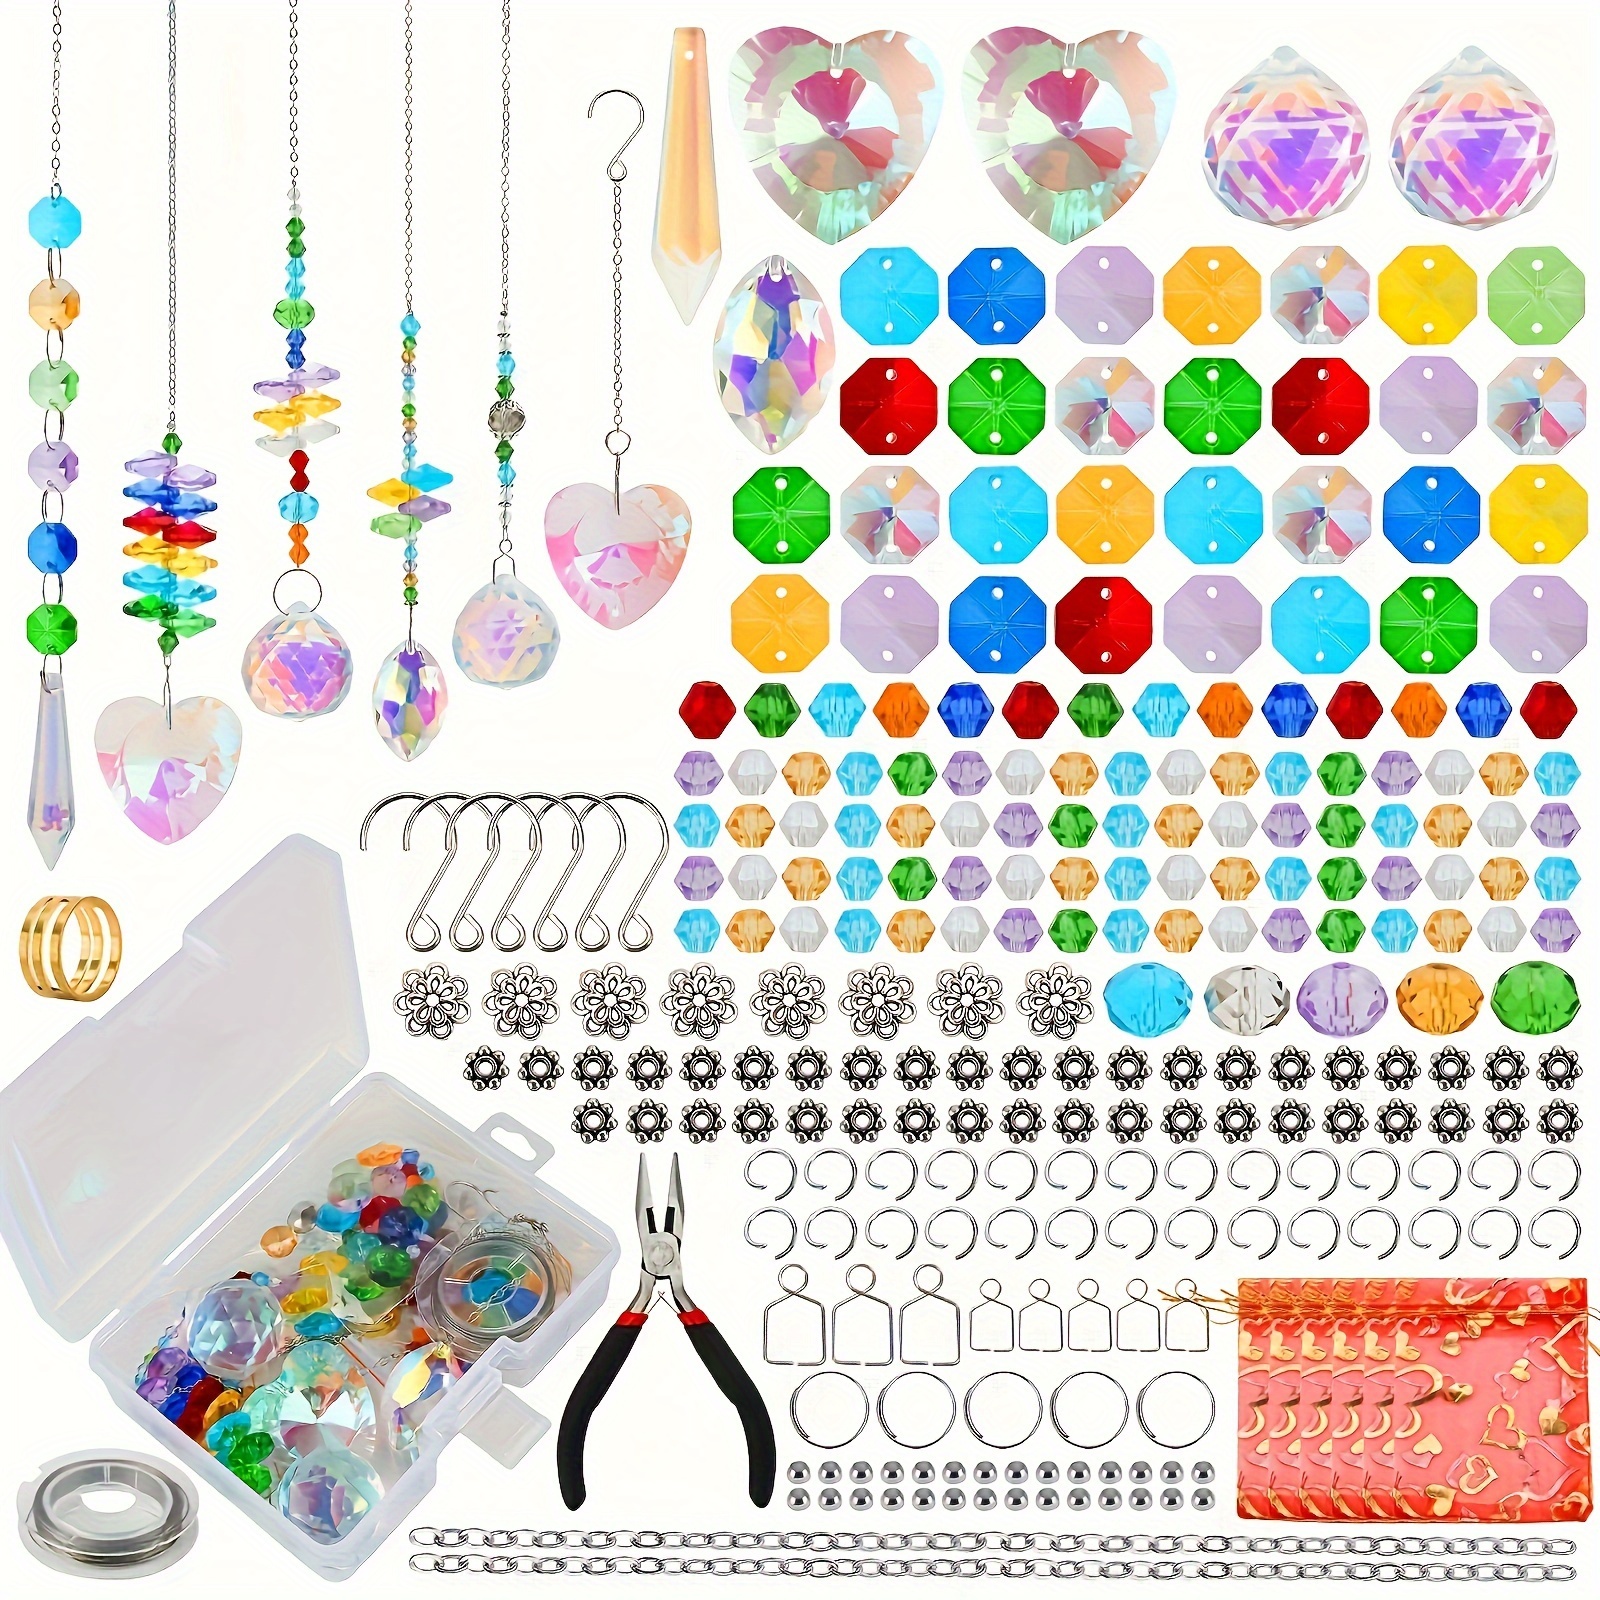 

460-piece Diy Crystal Suncatcher Kit - Colorful Beads & Prism Rainbow Maker For Window Hanging, Indoor/outdoor Garden Decor, Bohemian Style Mother's Day Craft Set